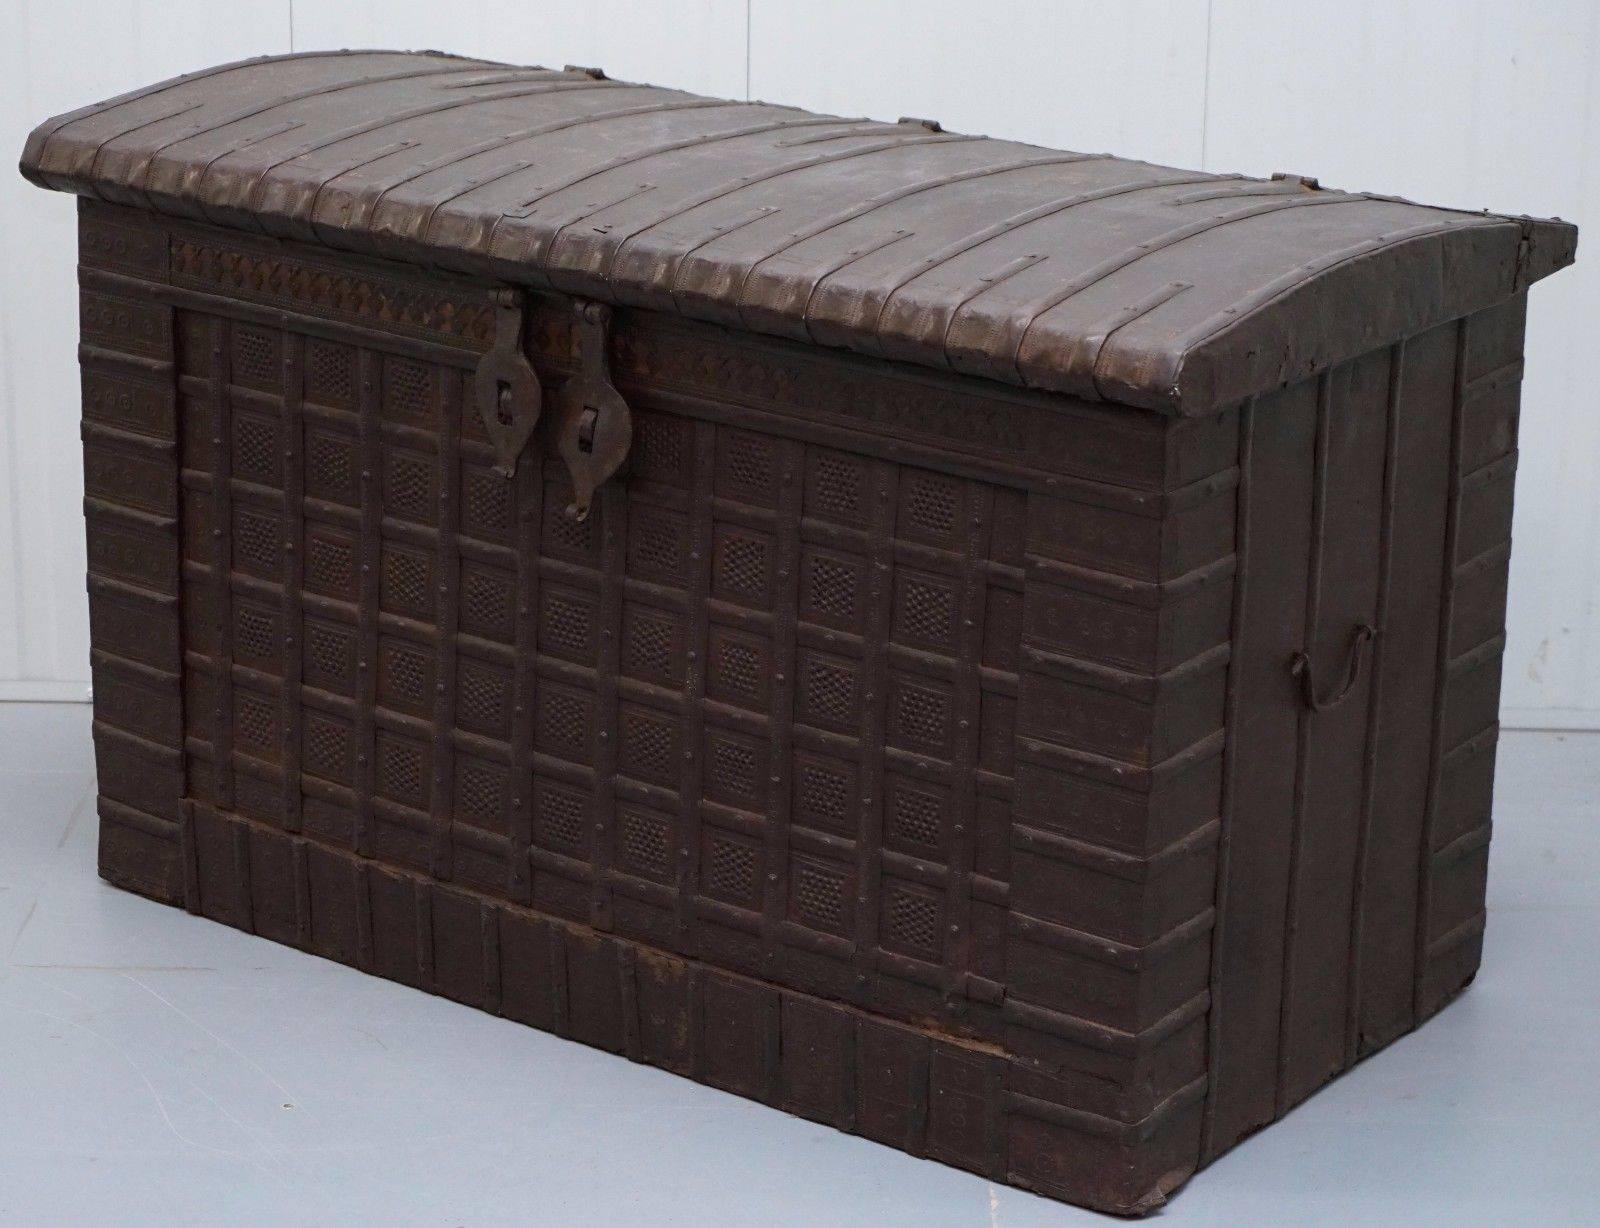 We are delighted to offer for sale this very rare circa 1850 extra grand solid iron with teak insides Rajasthani trunk or chest
 
Its mid-19th century, solid teak and iron banded trunk, Indian in origin and typical of the Rajastan antique